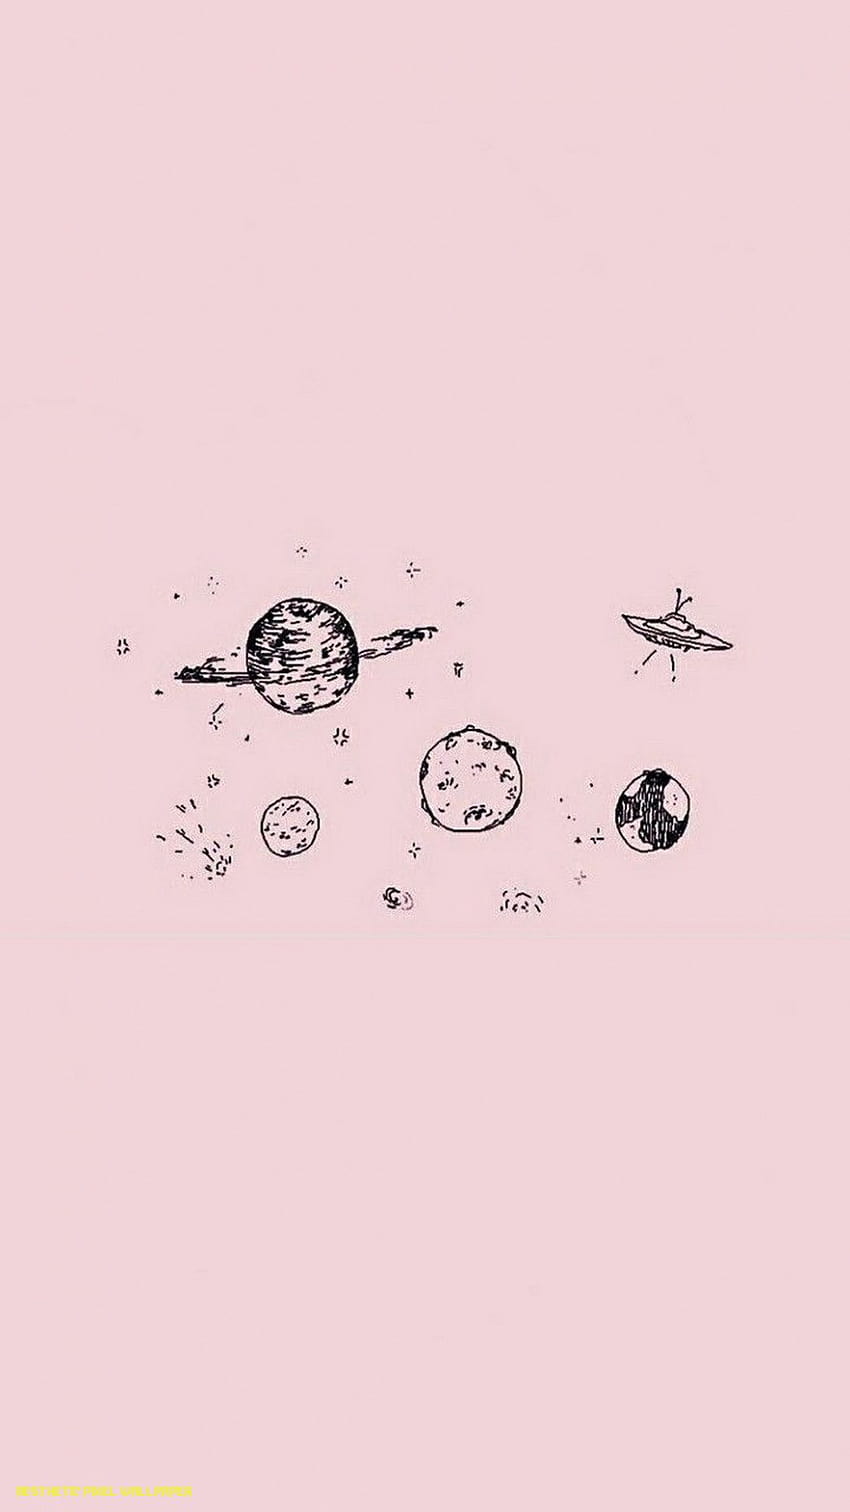 A drawing of the solar system on pink background - Android